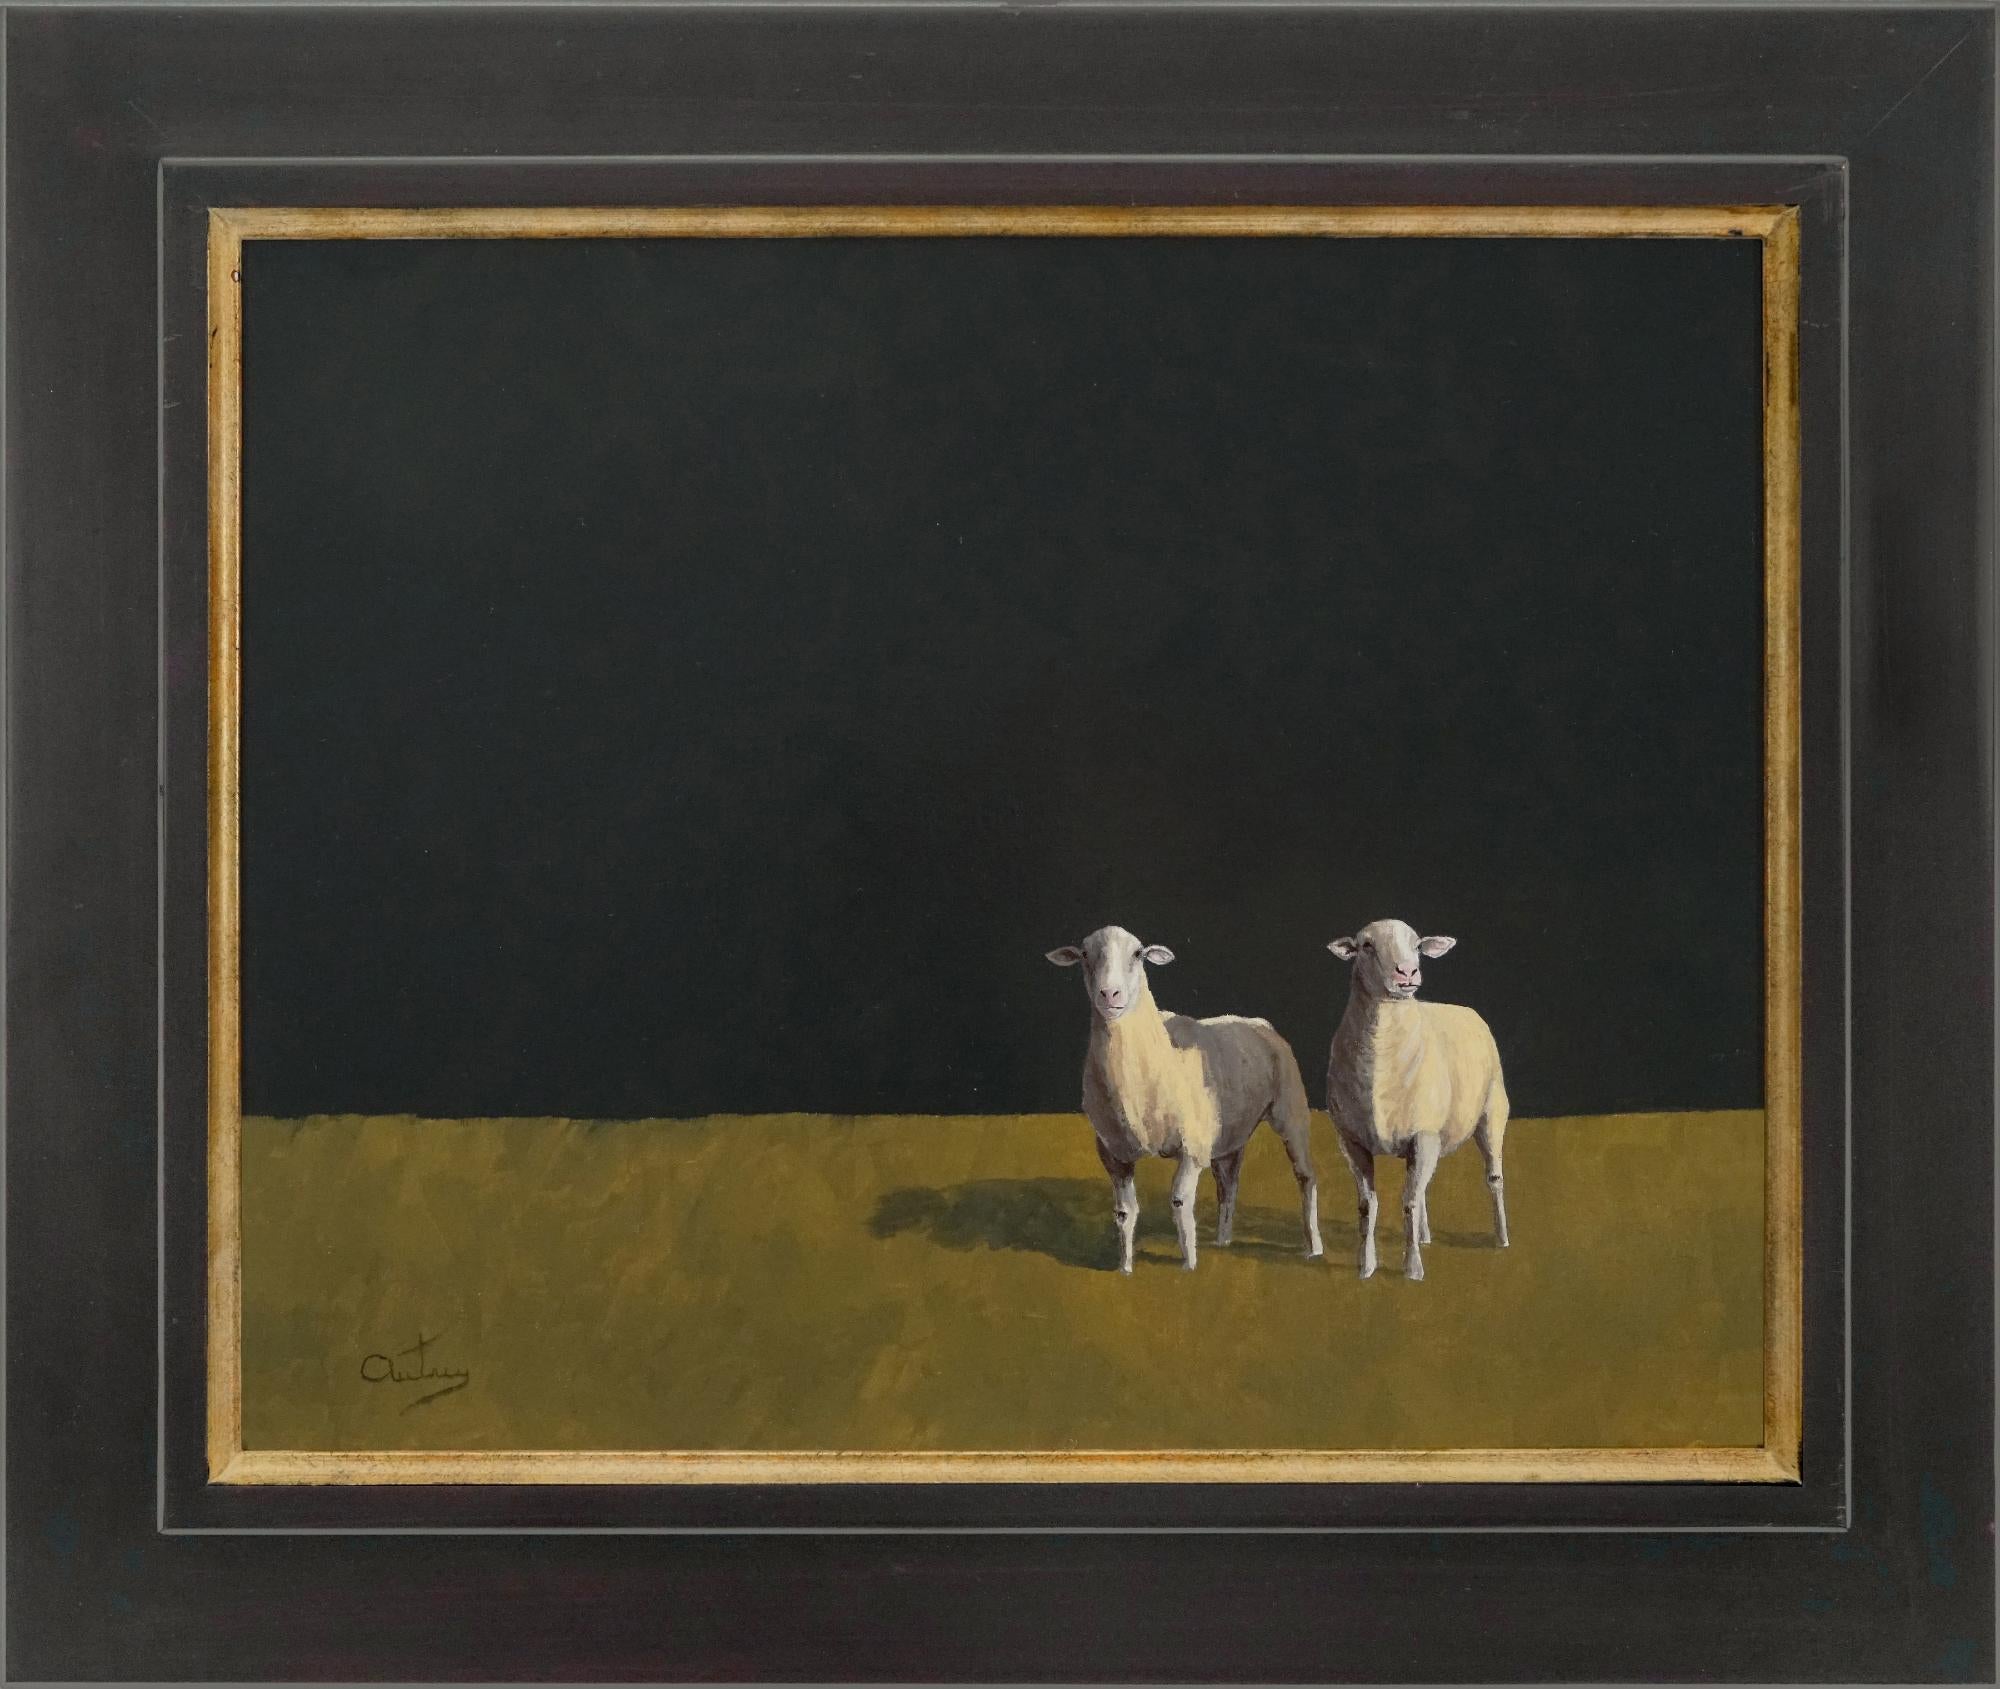 Reflections, Realist, Light/ Shadow, Sheep Oil Painting, Ovis 5